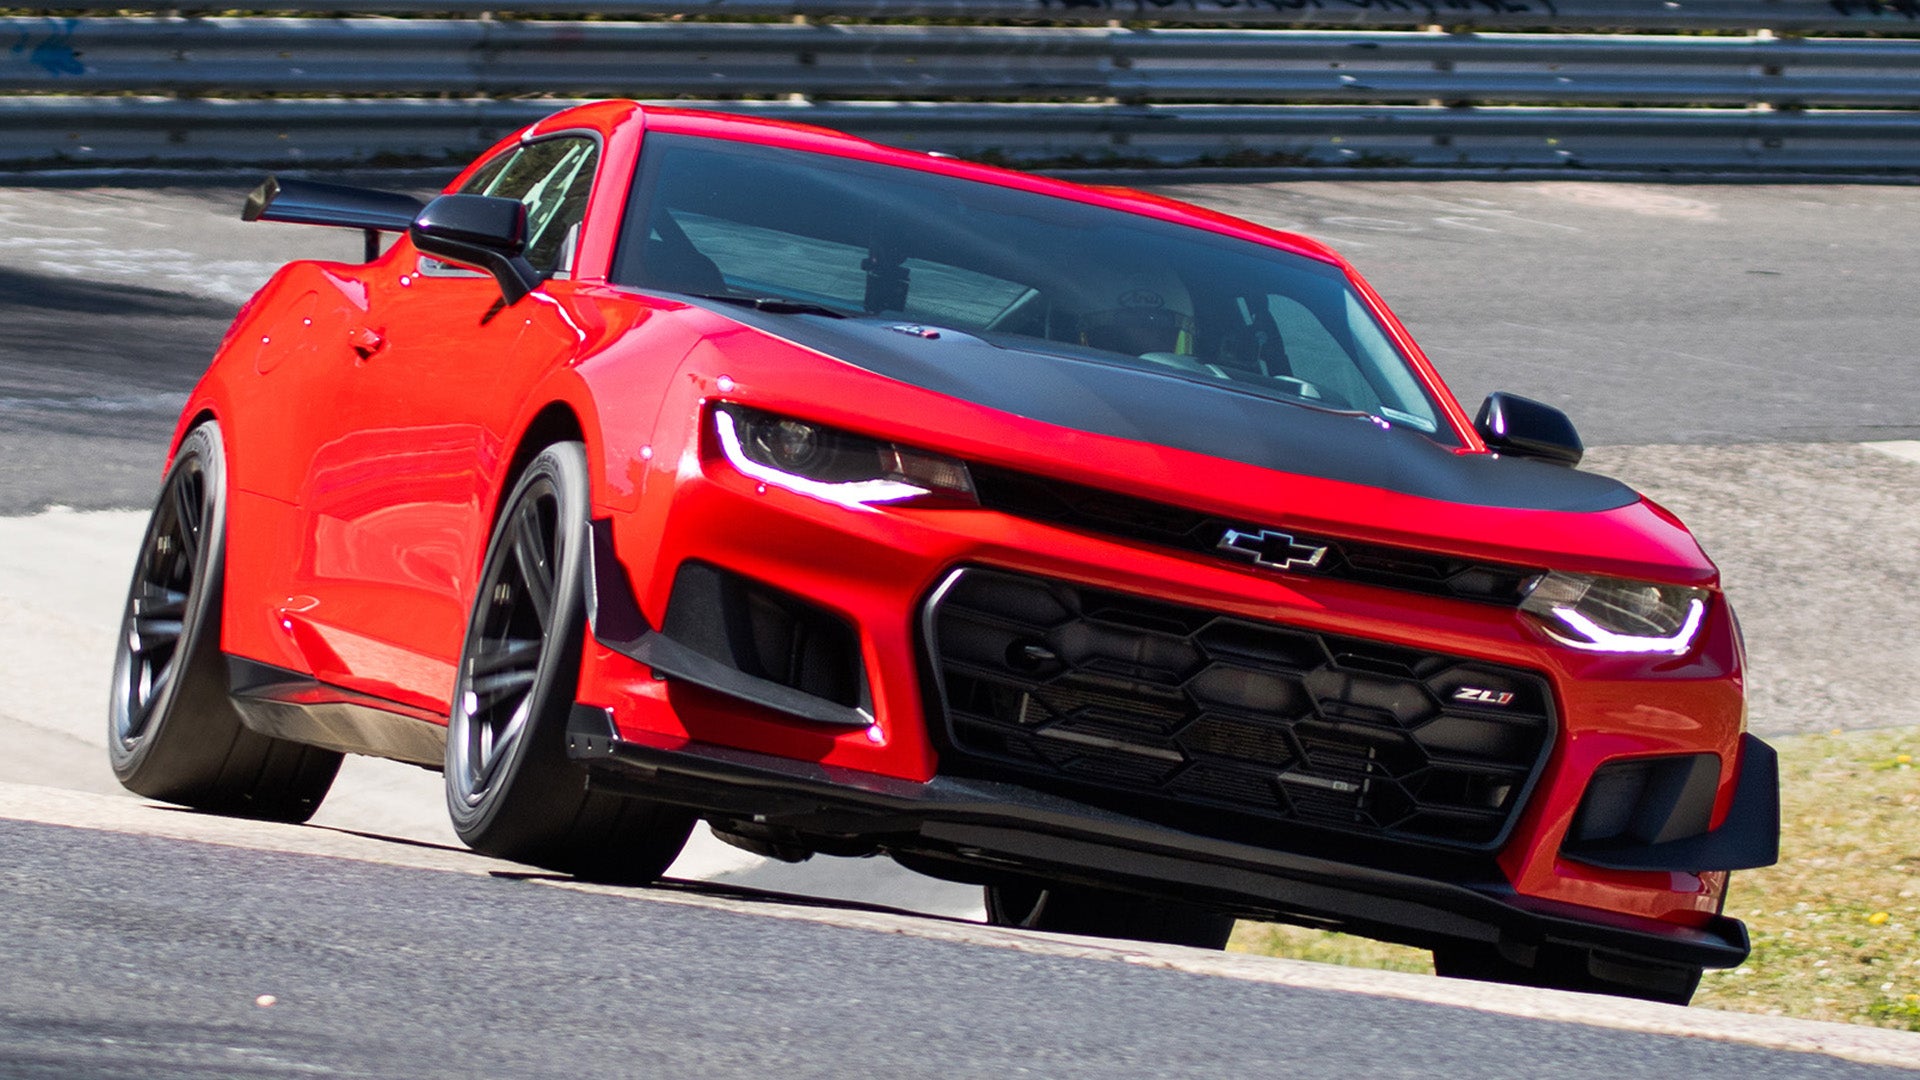 Chevy Drops Camaro Zl1 1Le For Final Year, Heating Up Z28 Rumors